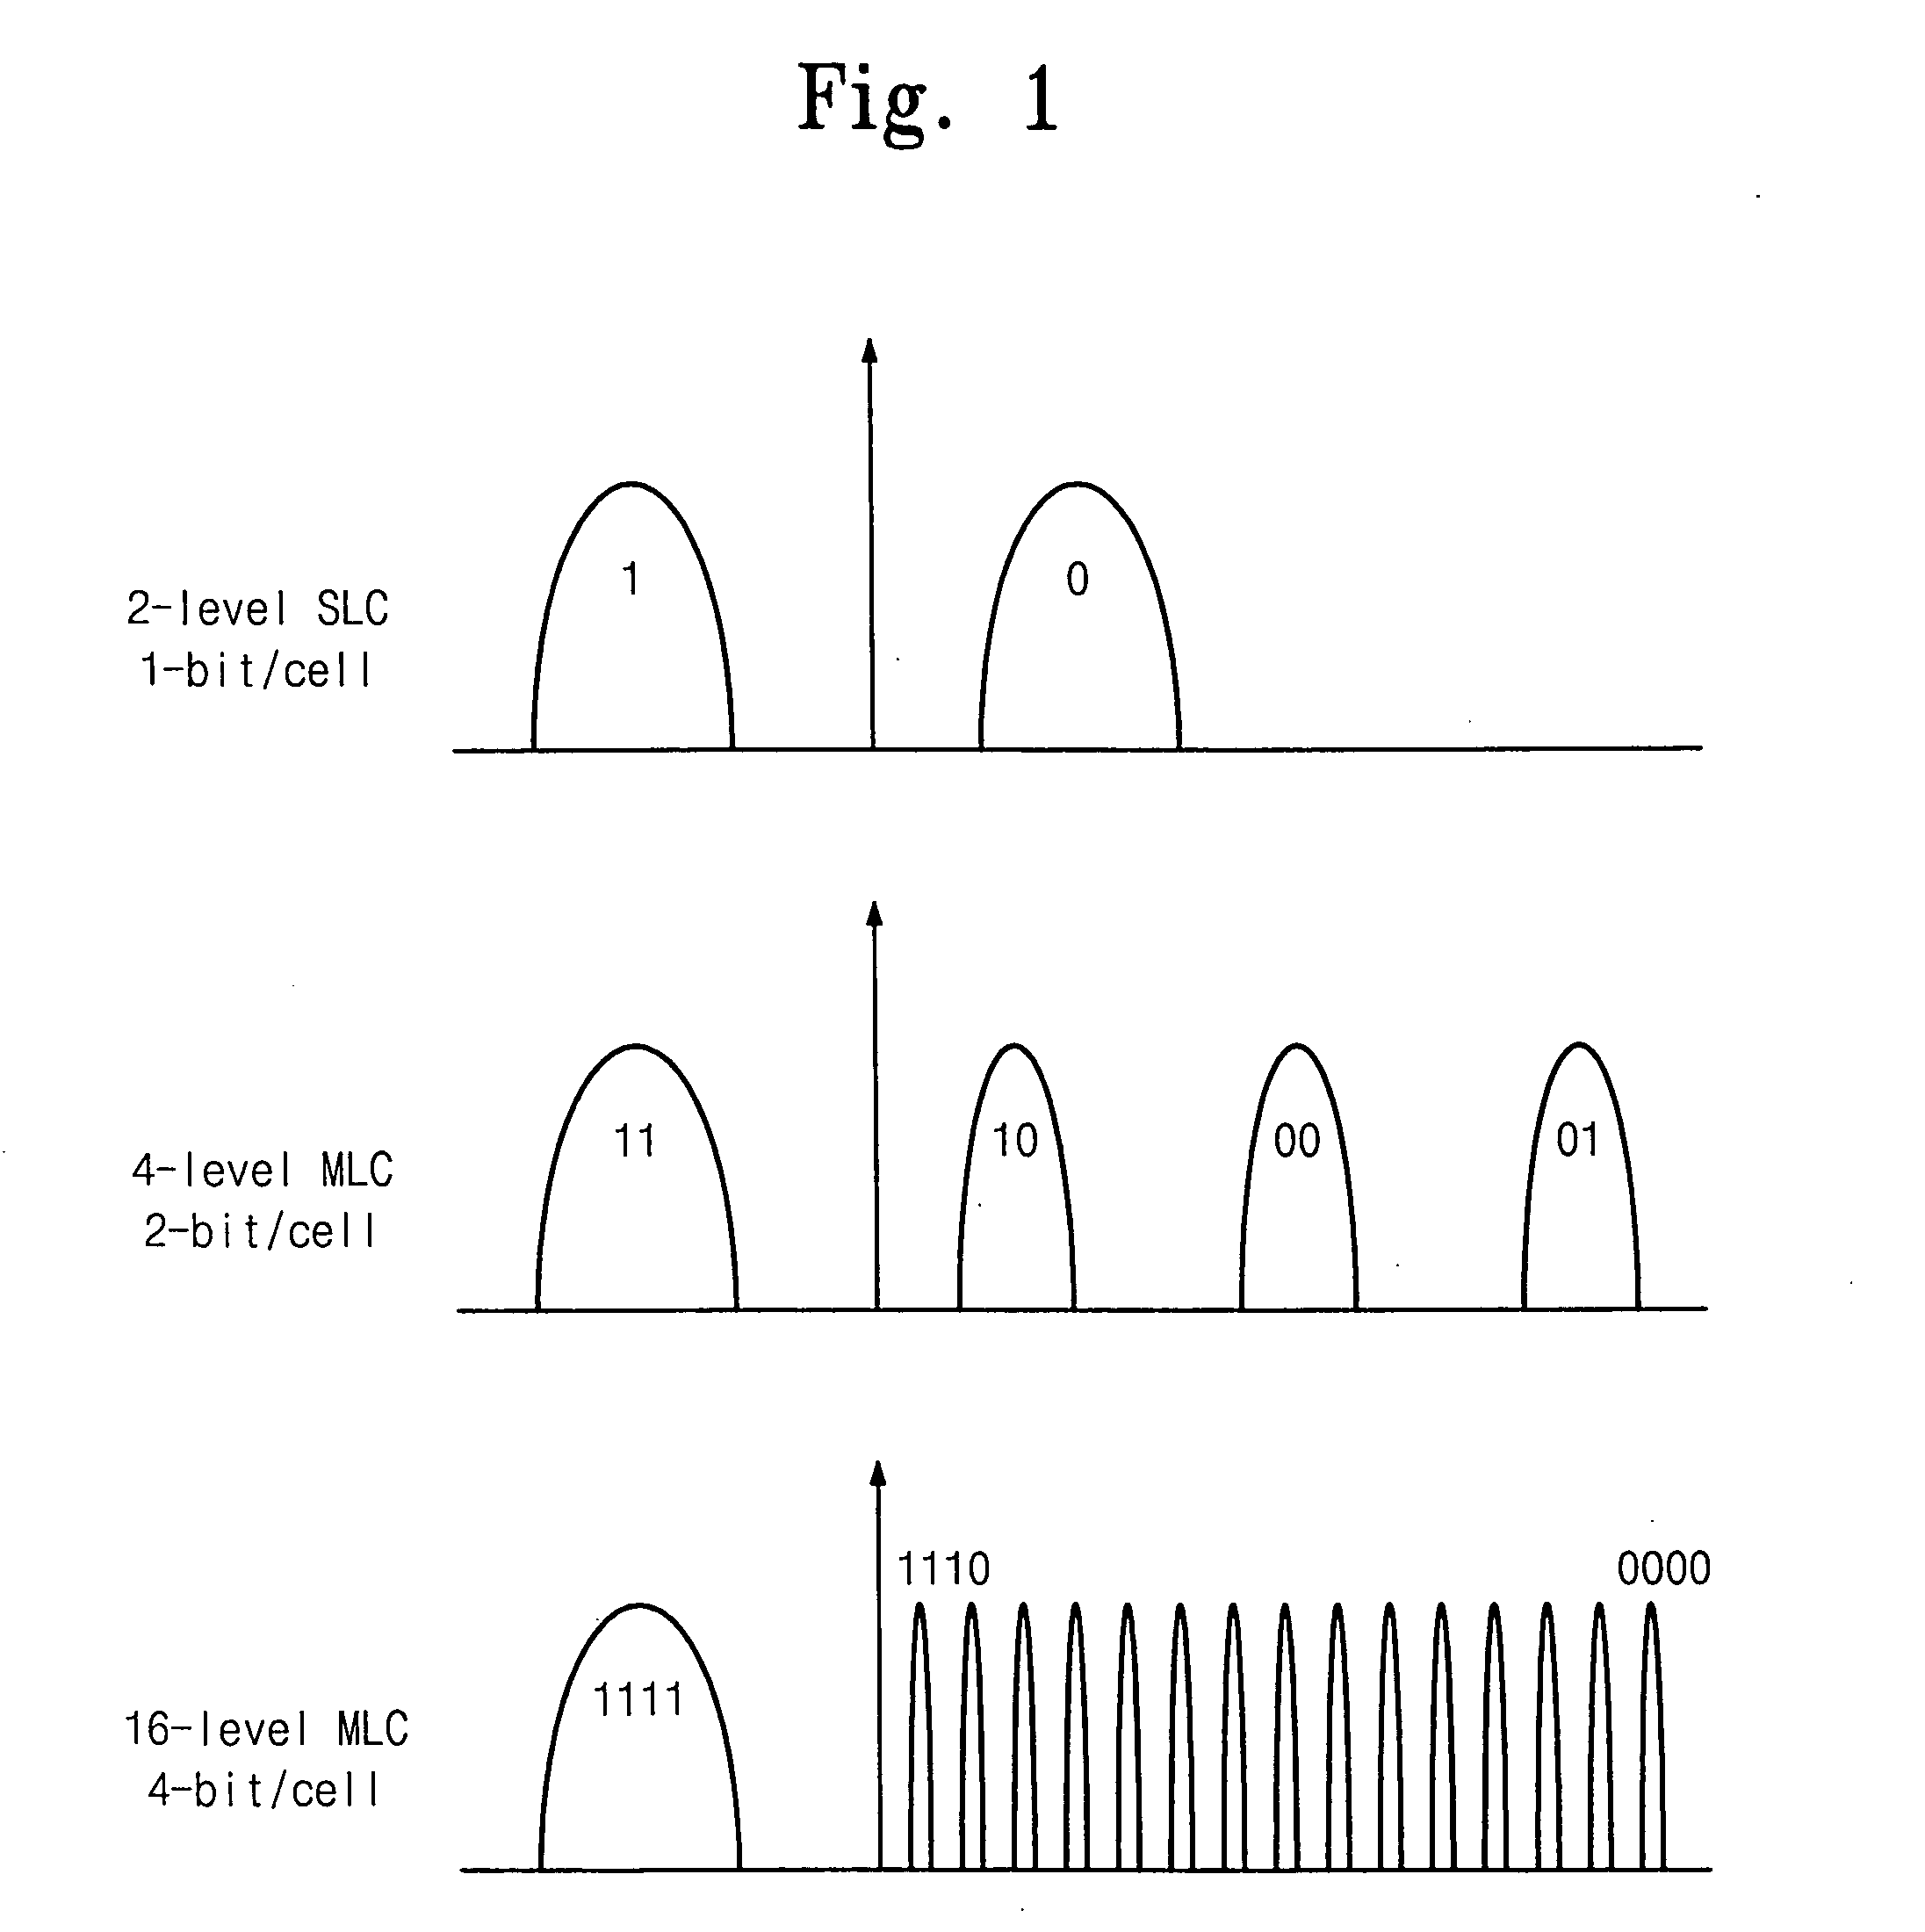 Multi-bit flash memory device including memory cells storing different numbers of bits